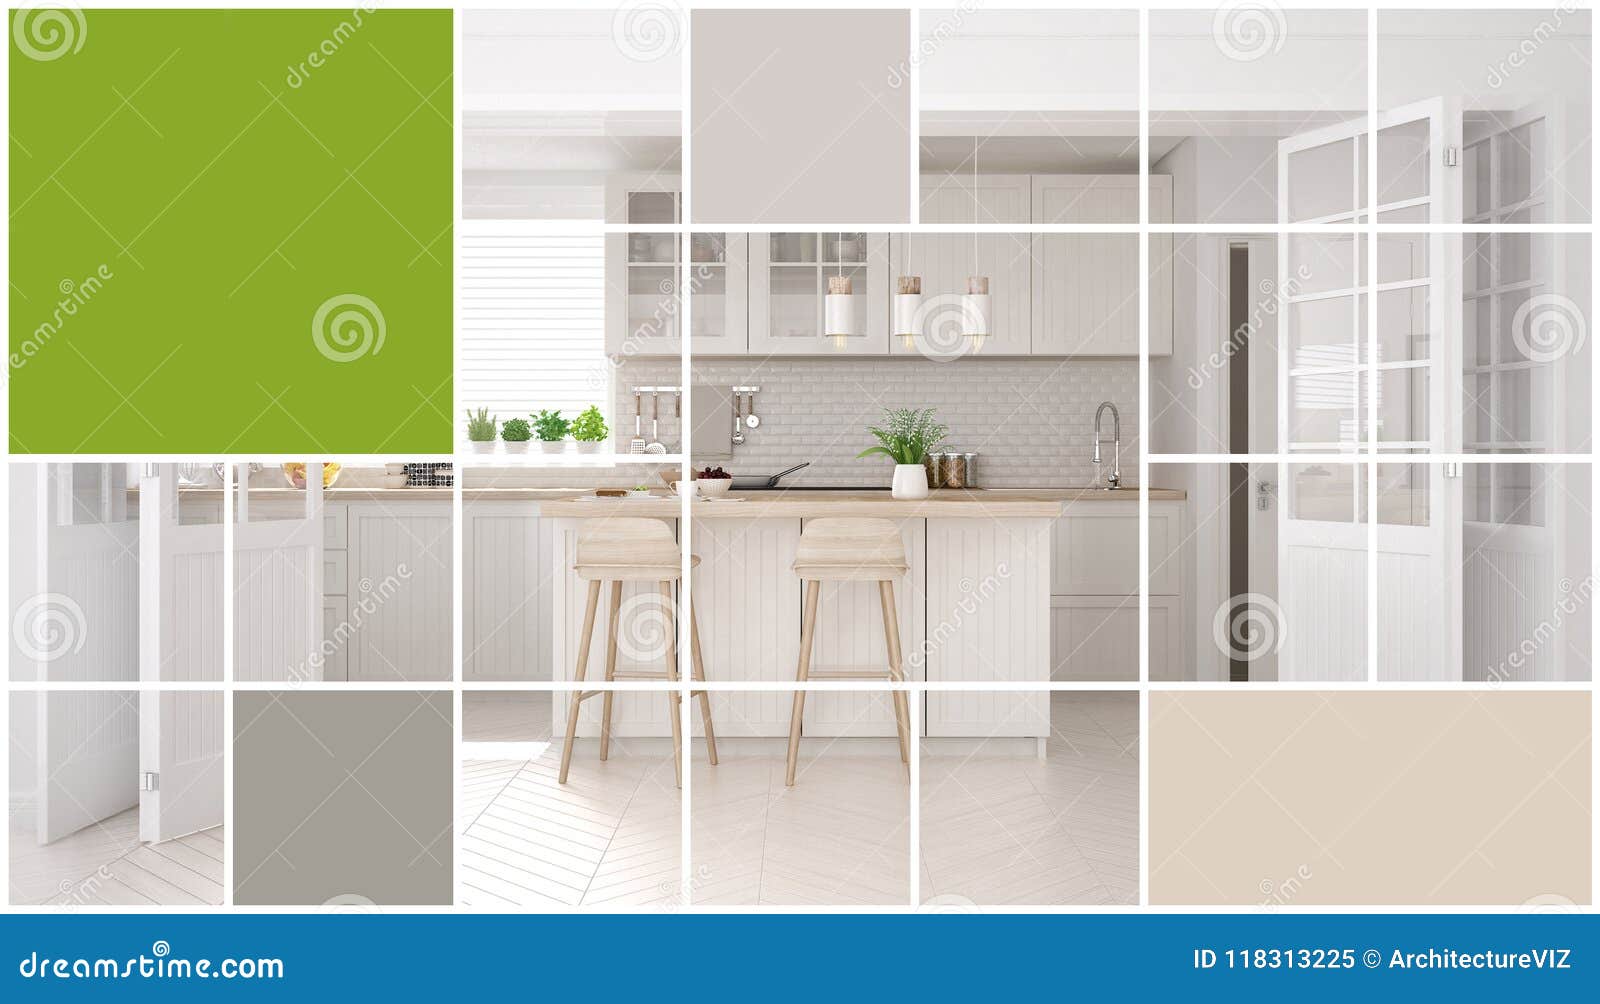 Geometric Square Mosaic Graphic Effect With Copy Space For